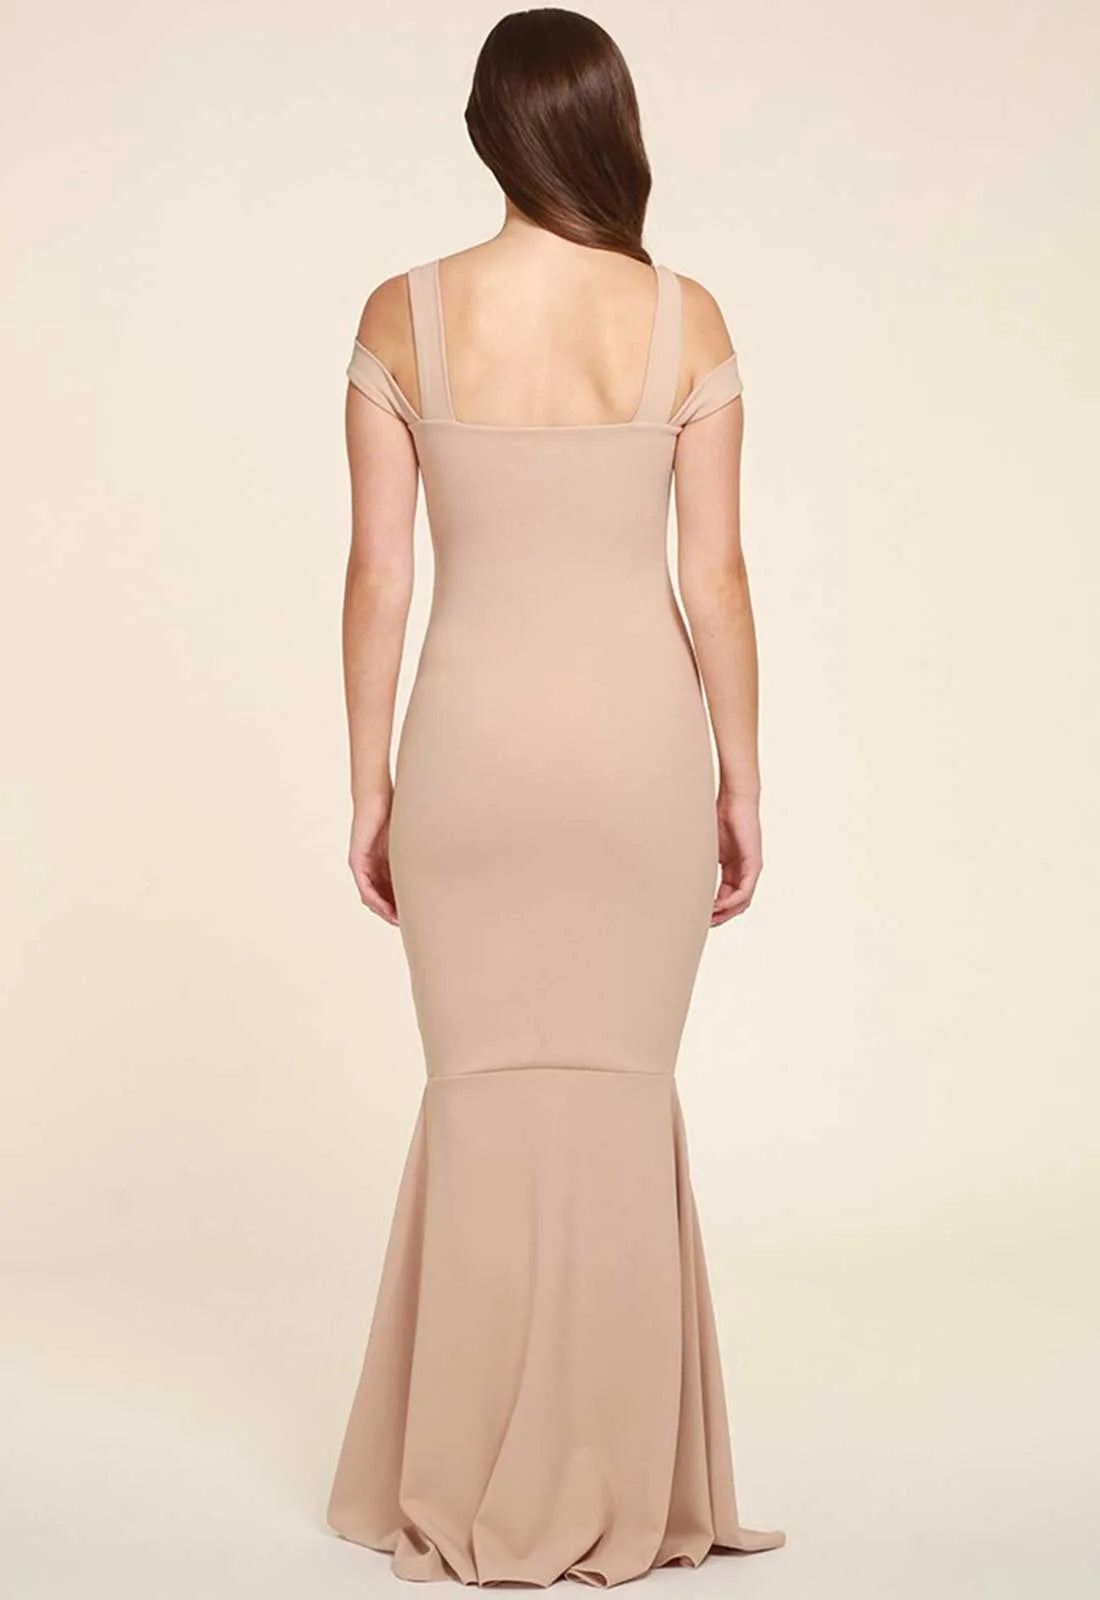 Honor Gold Evie Nude Maxi Dress in Nude-24742